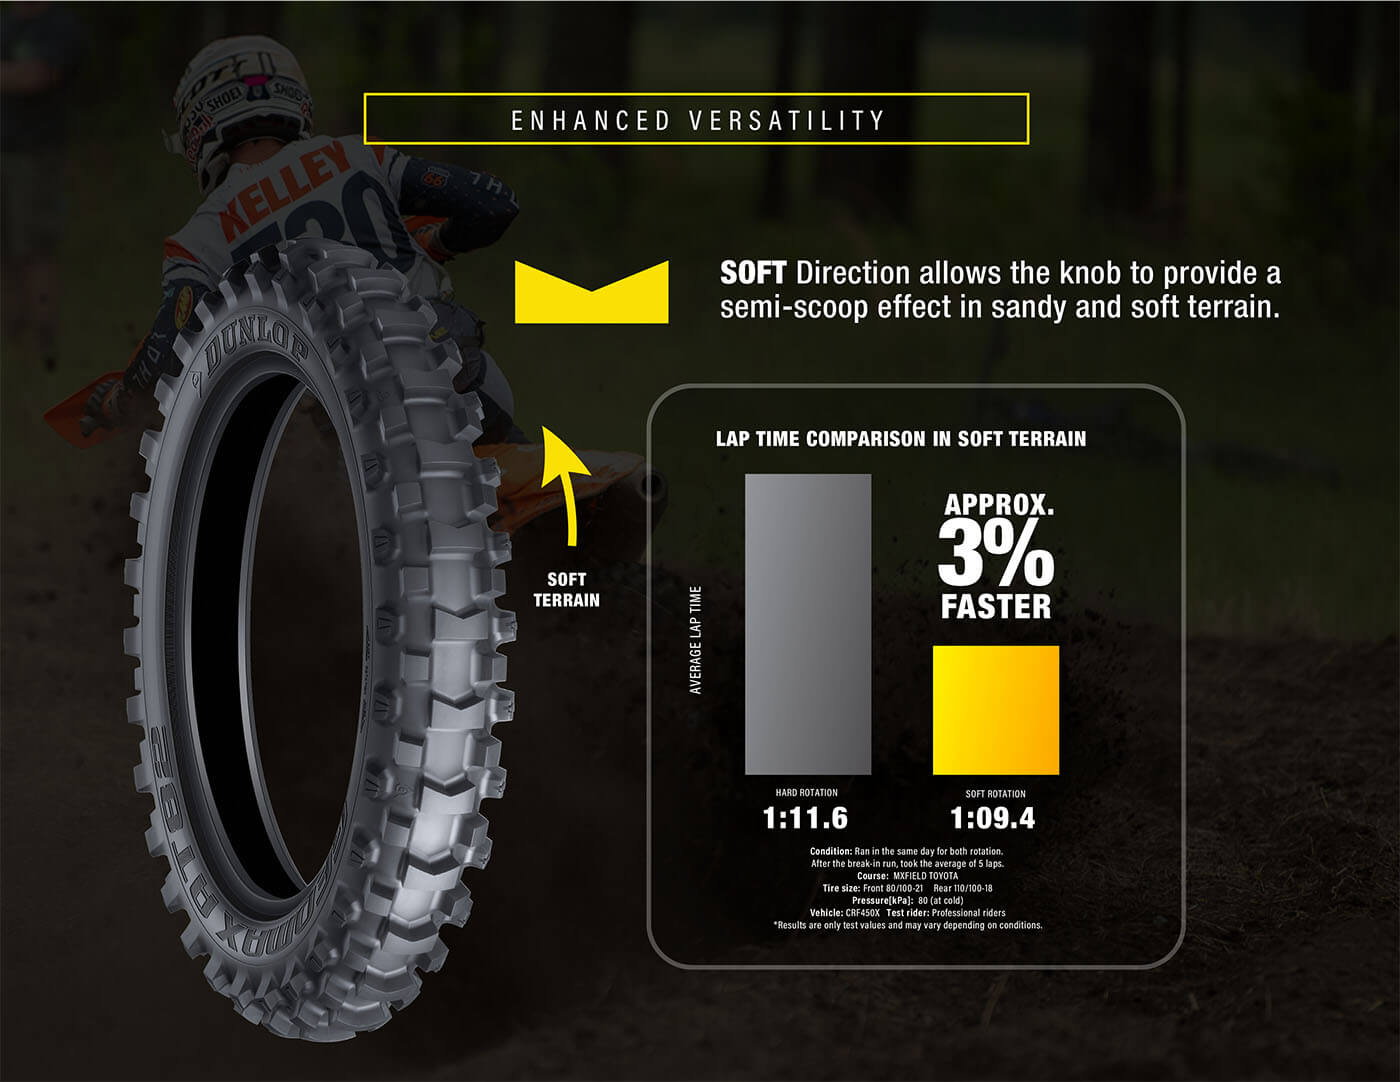 Tried And Tested: Dunlop RoadSport 2 Tires - Roadracing World